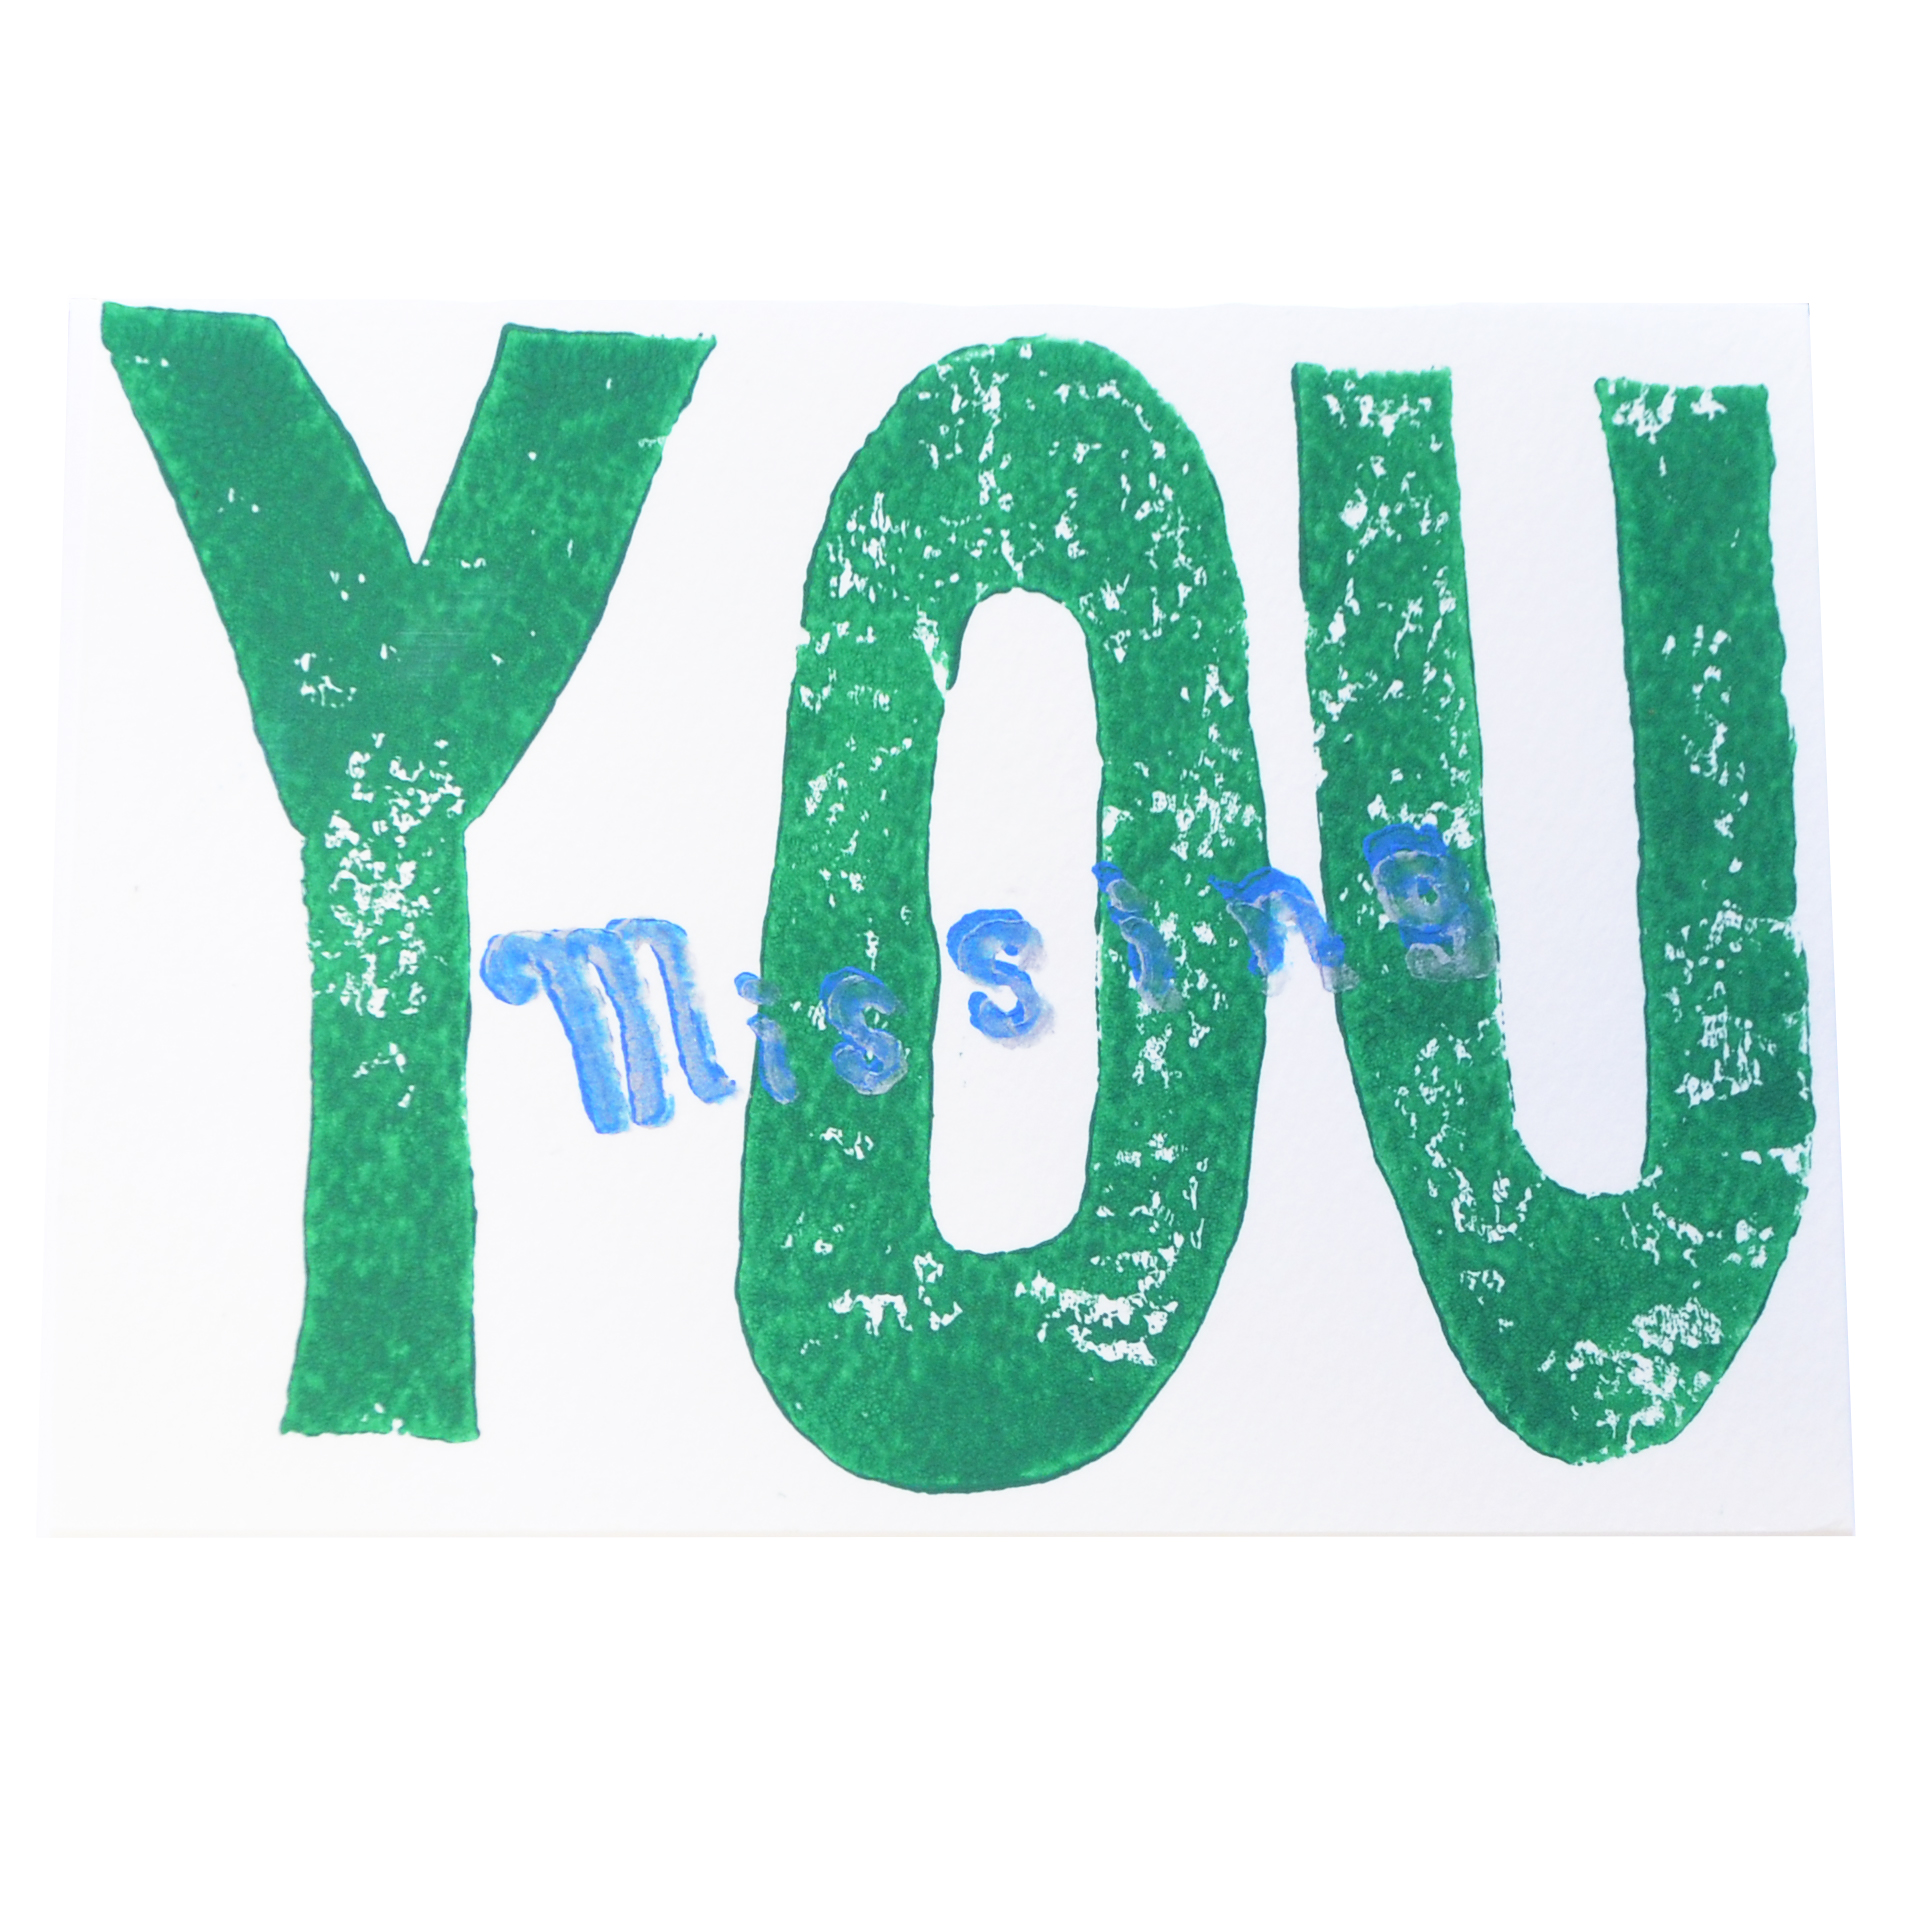 Green Missing You card by Paul Eno